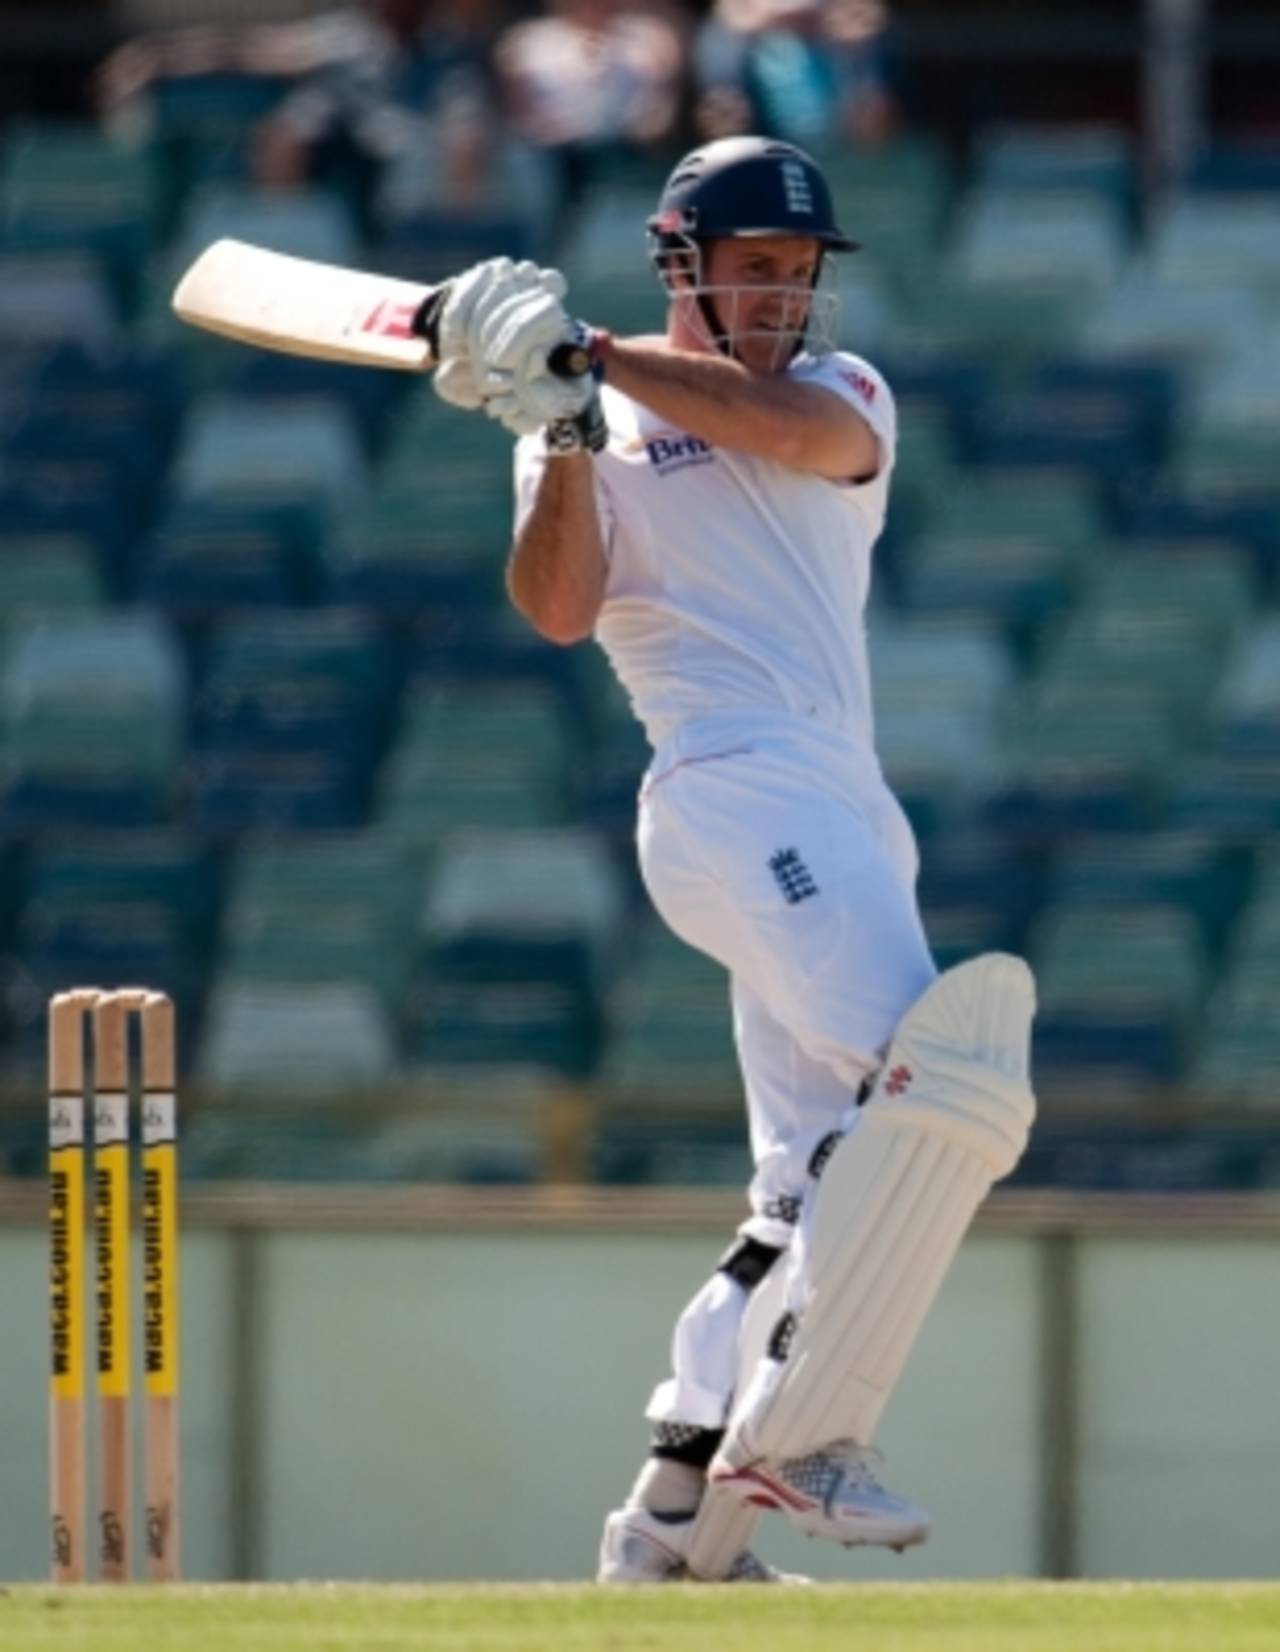 Andrew Strauss struck 15 fours and a six in his century, Western Australia v England XI, Perth, November 7 2010